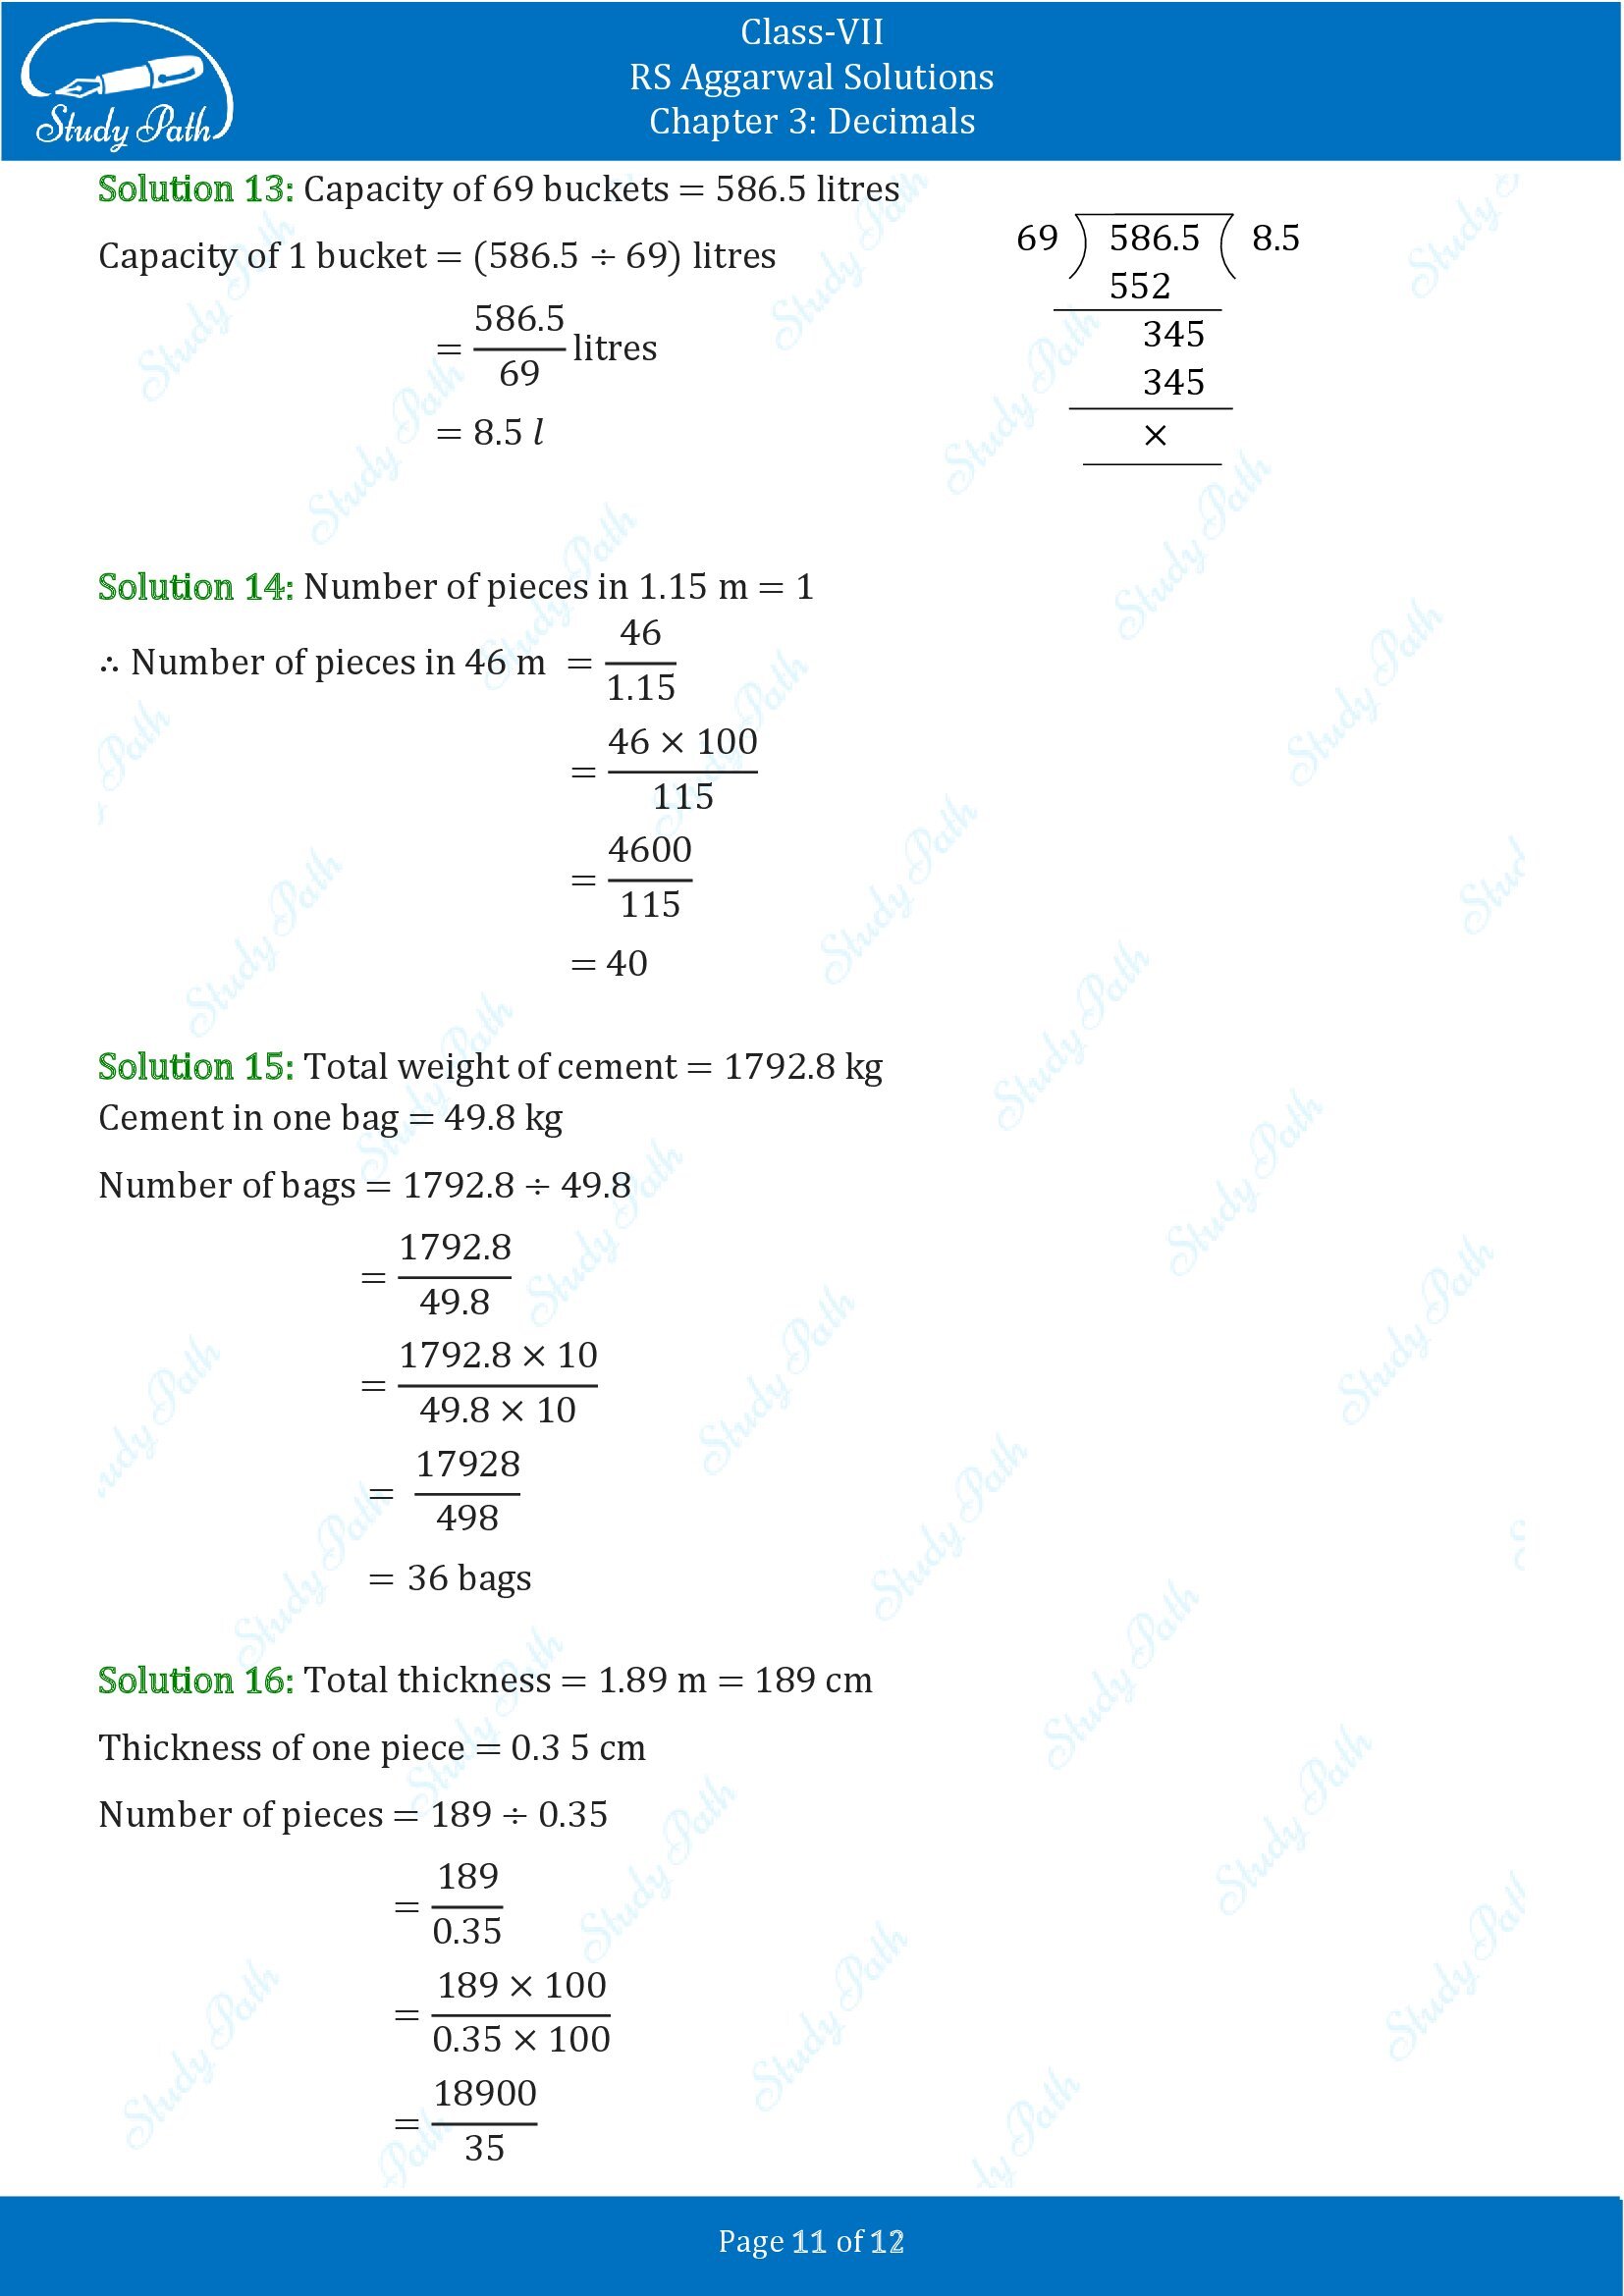 RS Aggarwal Solutions Class 7 Chapter 3 Decimals Exercise 3D 00011